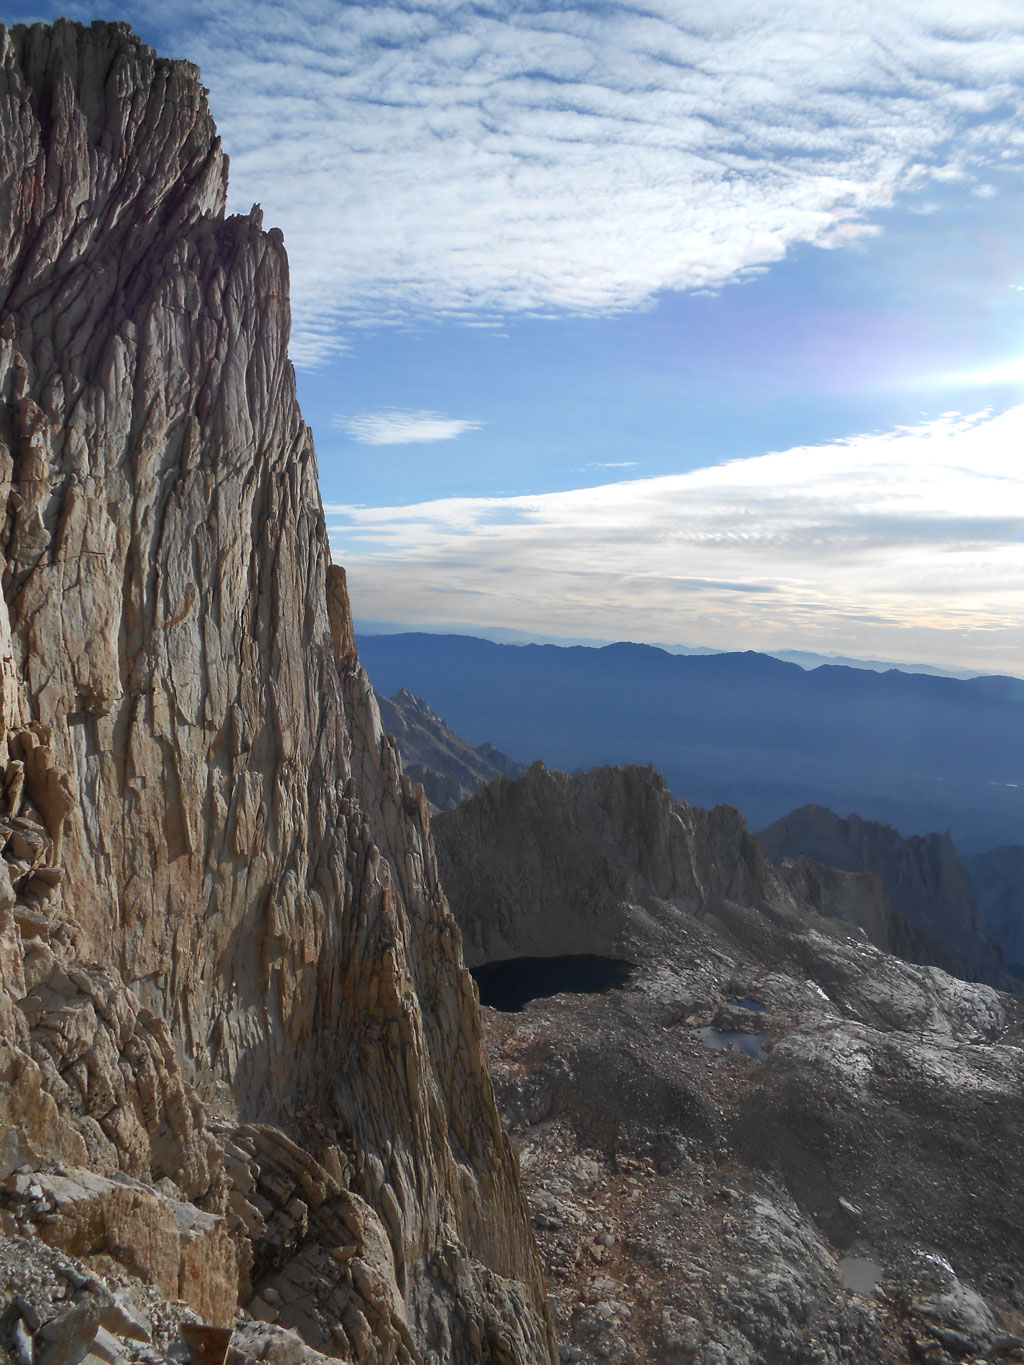 Near the top of Mount Whitney.